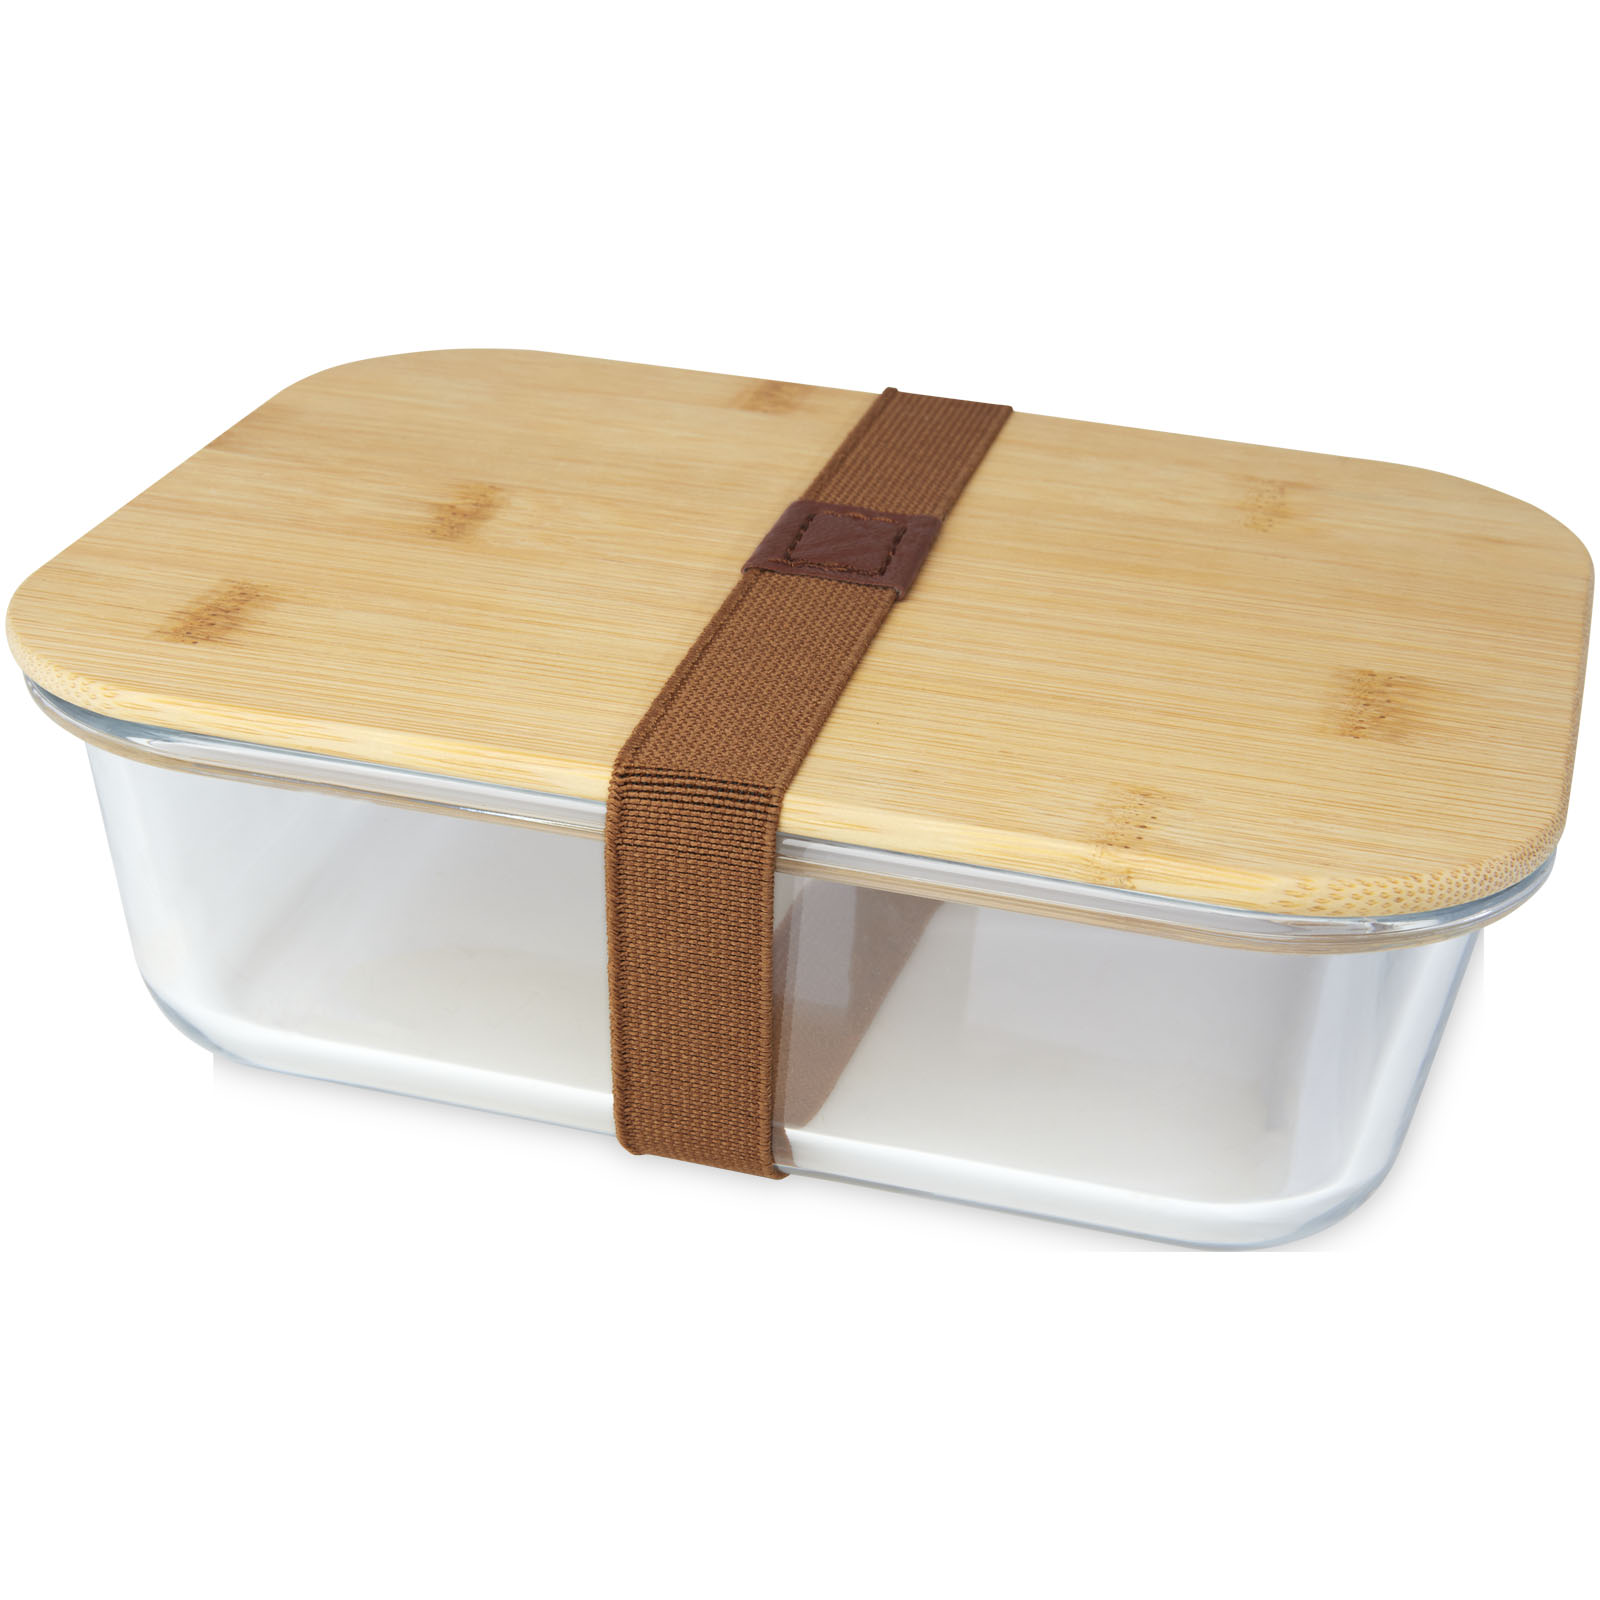 Advertising Lunch Boxes - Roby glass lunch box with bamboo lid - 0